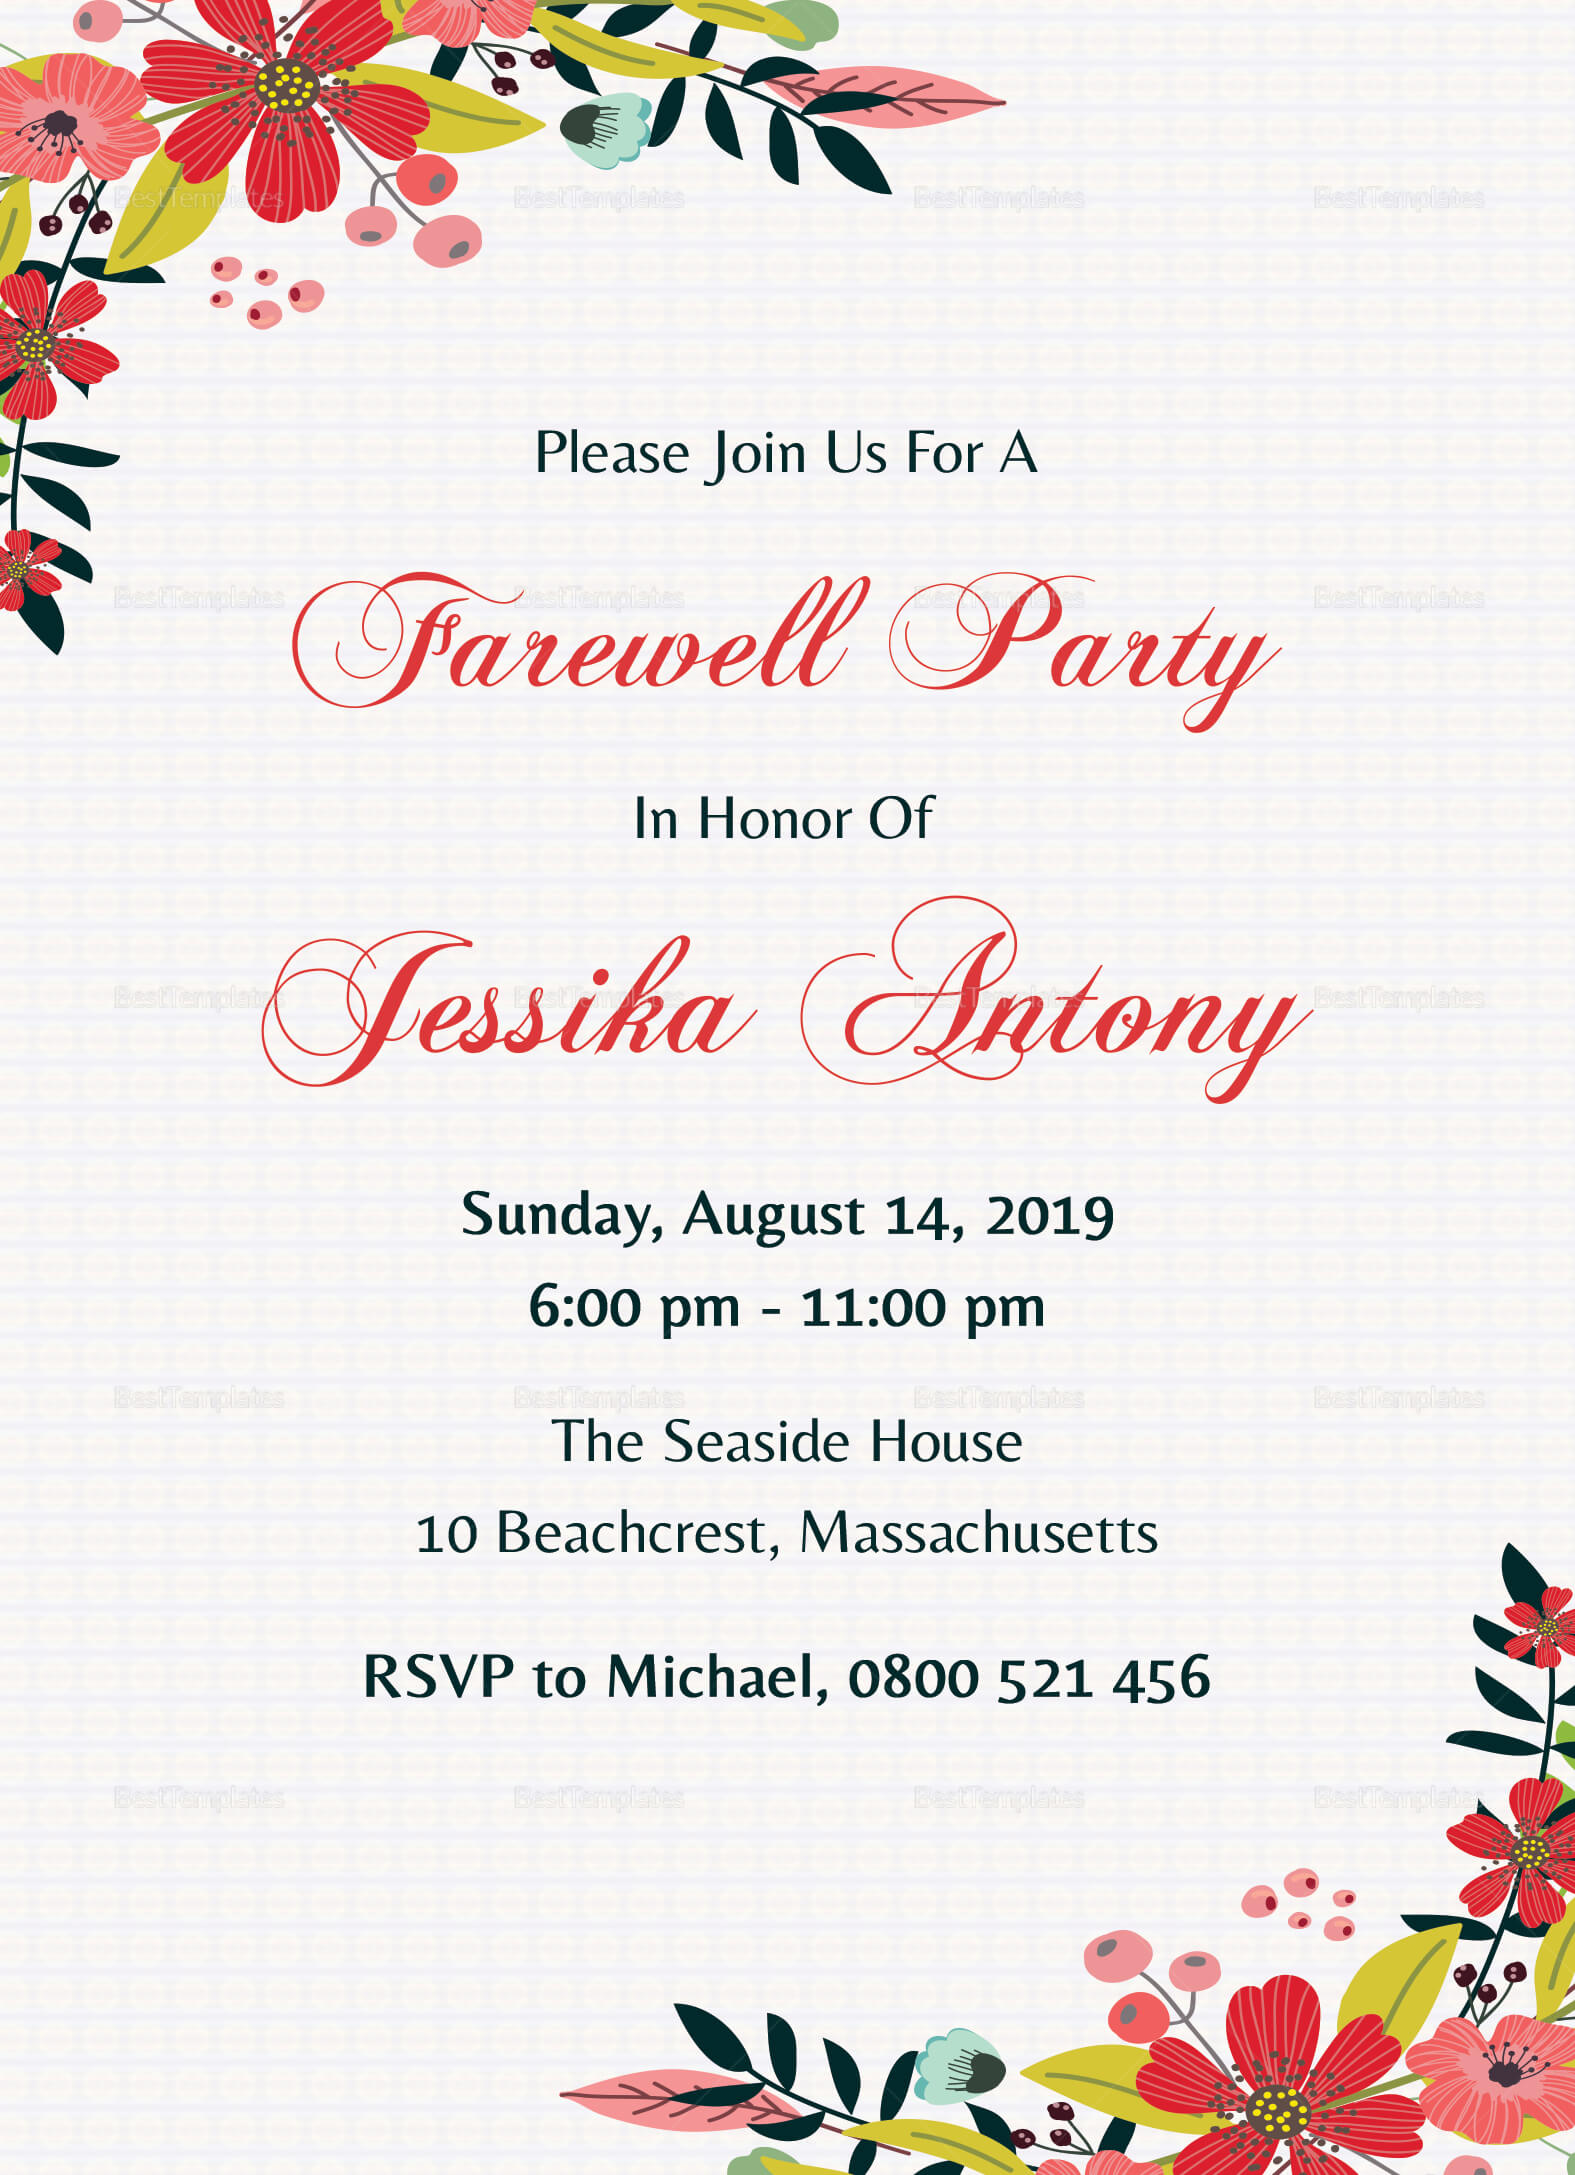 009 Farewell Party Invitations Templates Invitation28129 In Farewell Card Template Word